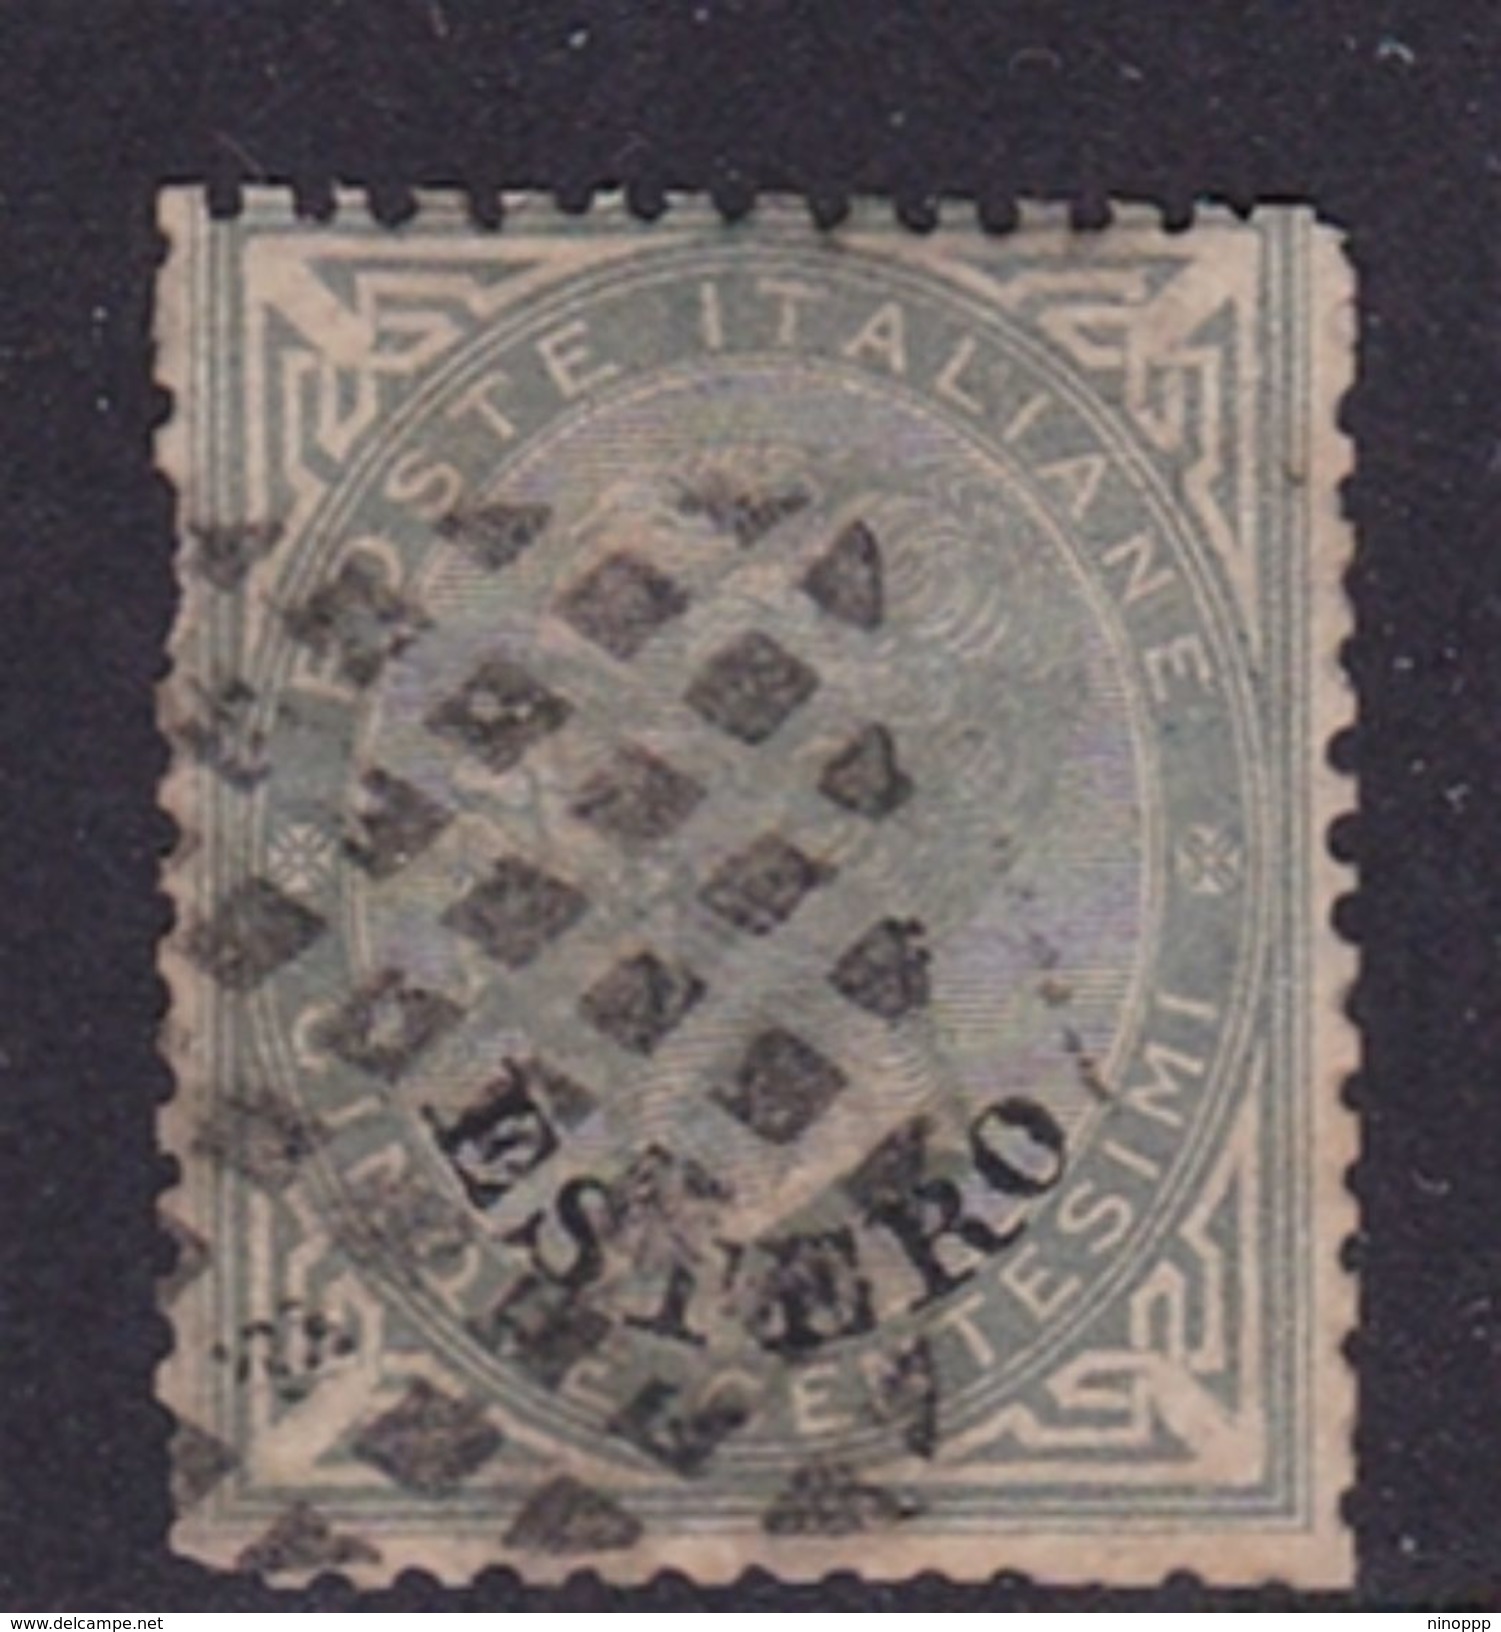 Italy-Italian Offices Abroad-General Issues- S3 1874  5c Grey Green, Used - Algemene Uitgaven